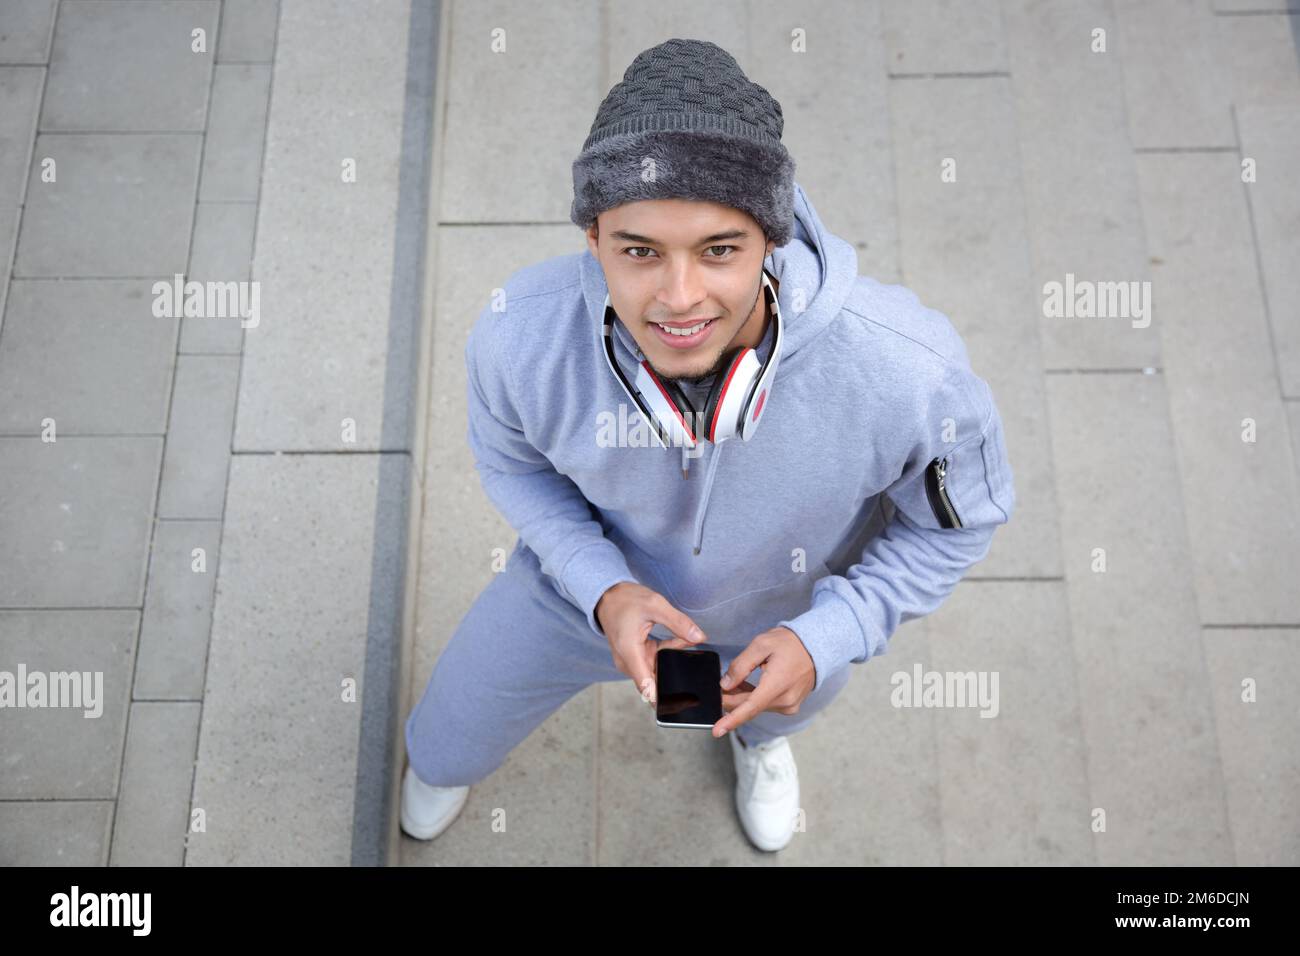 Smiling young latin man runner winter sports training from above Stock Photo